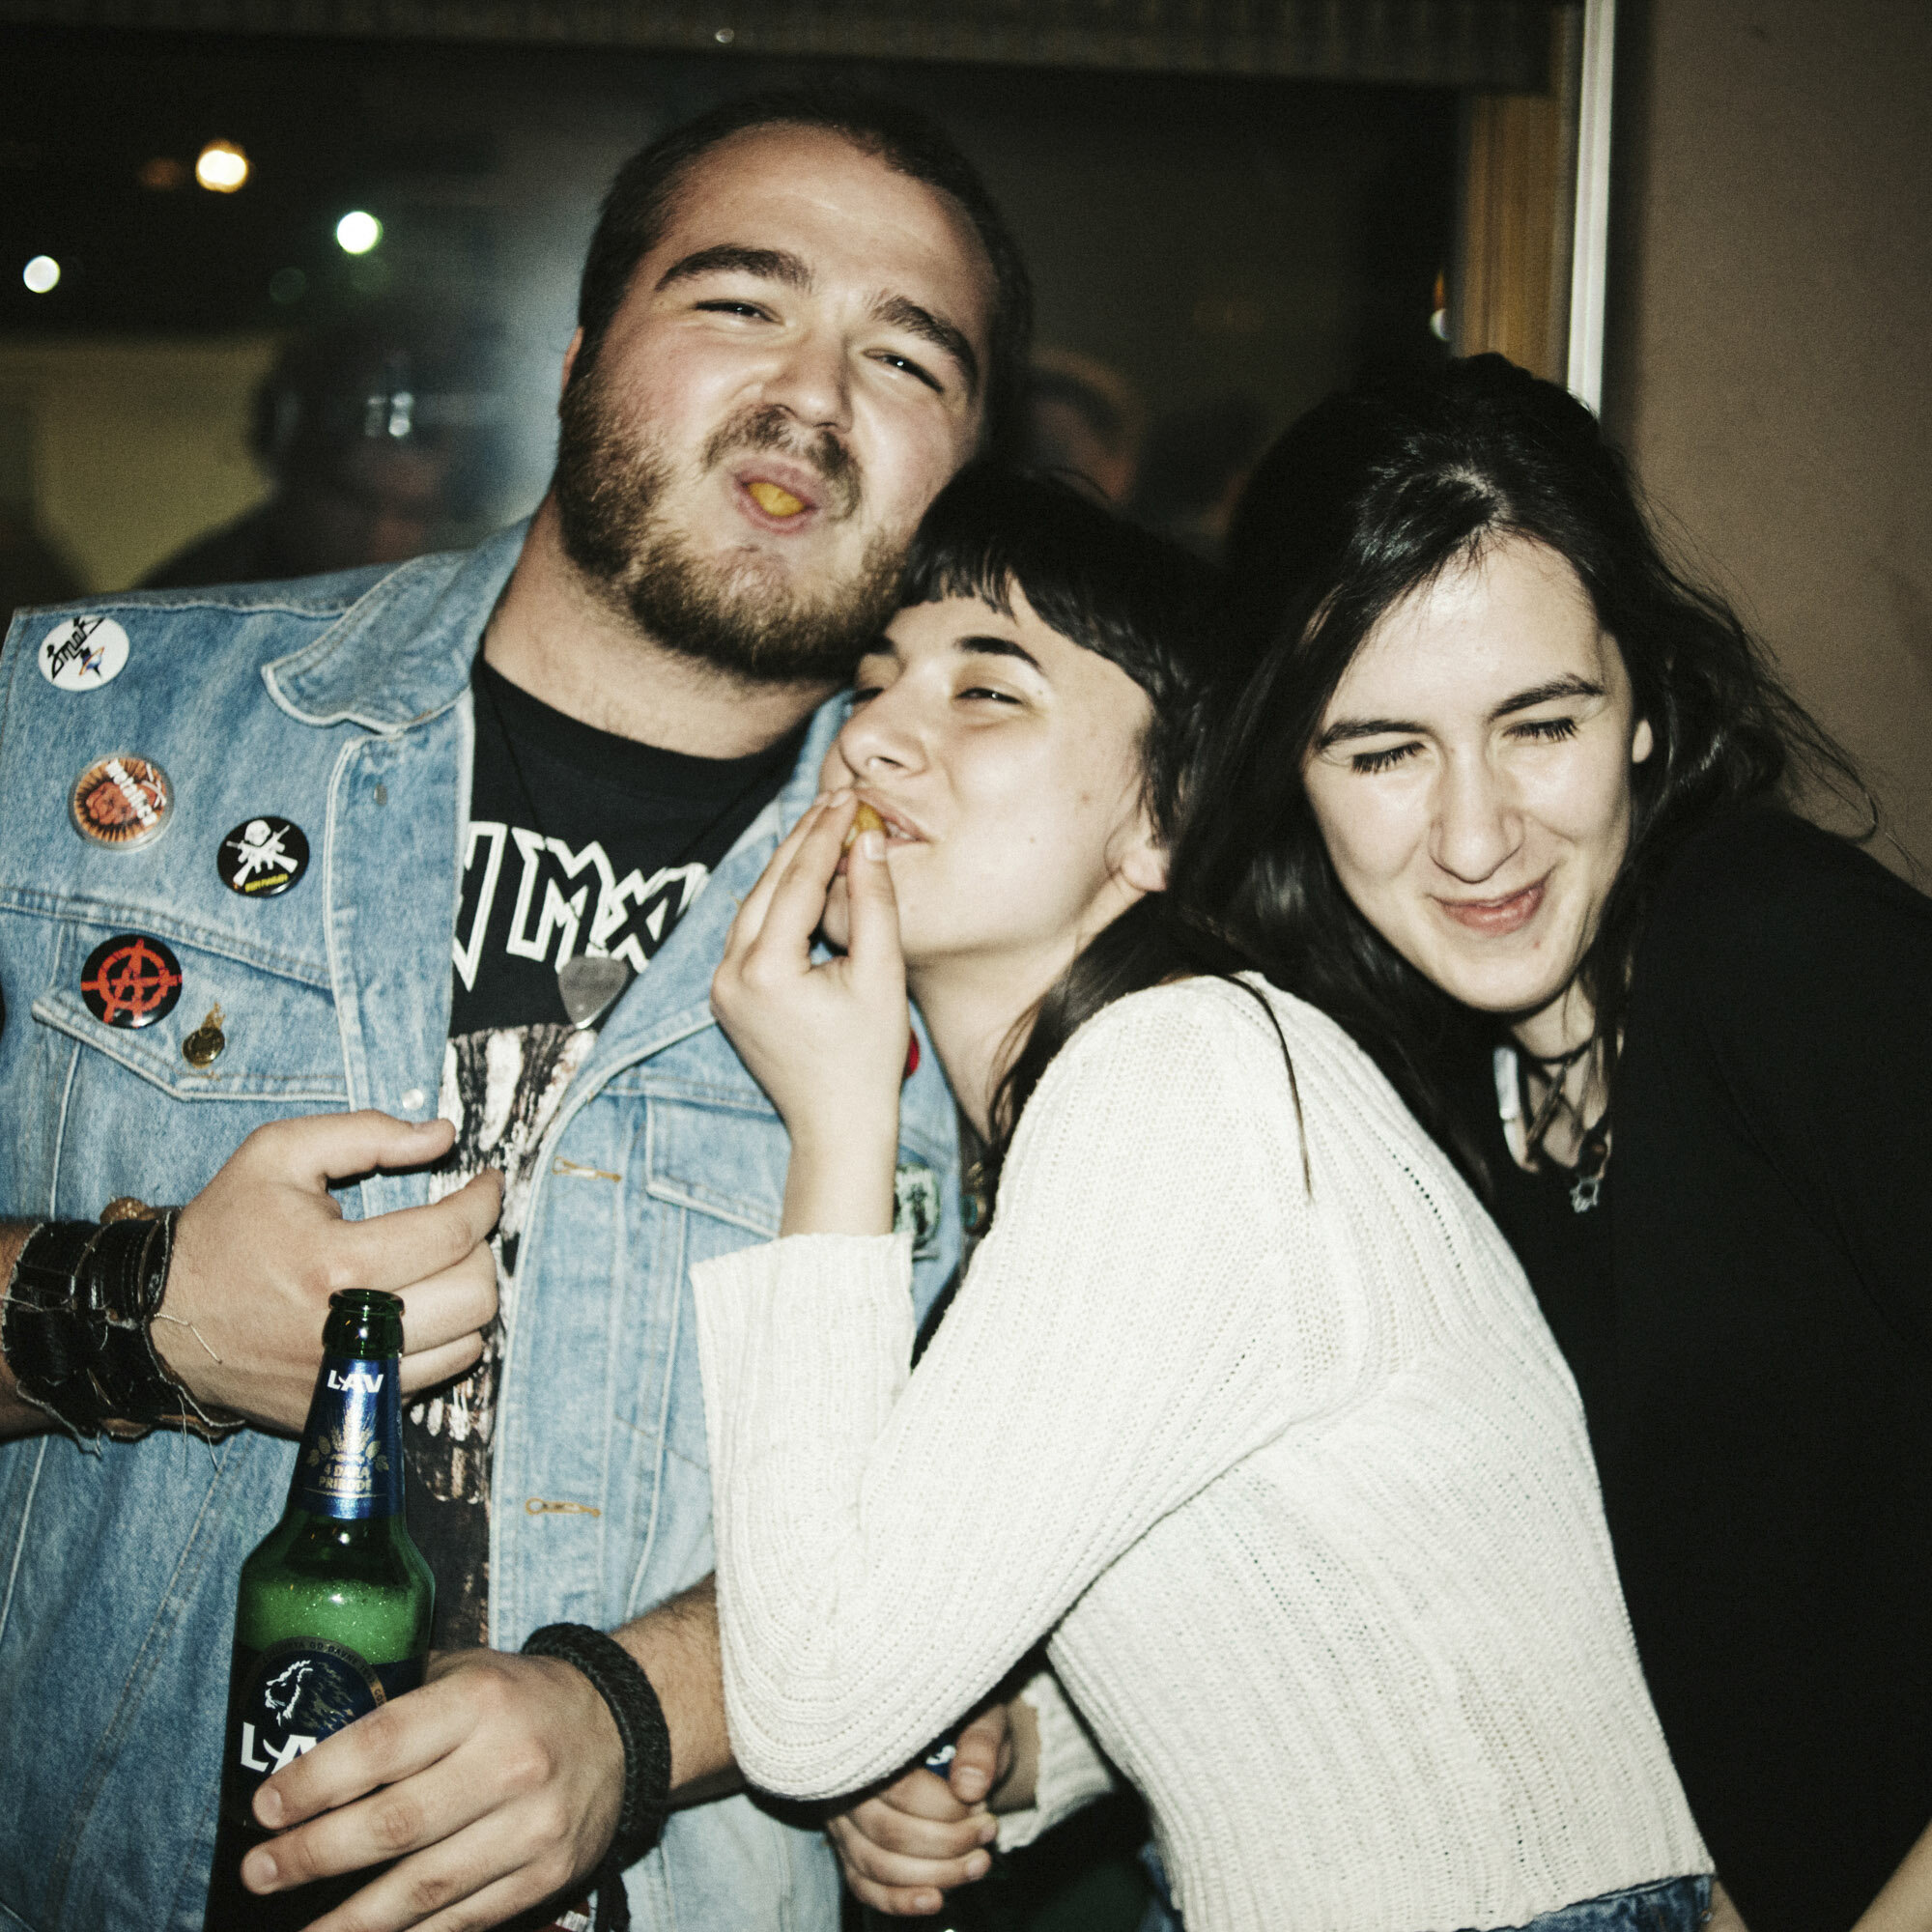  Alem, Ilda and Tringa (from left to right) have fun and drink beers during the gig in the Serbian enclave of Gracanica. Alem is from Montenegro. Ilda has Bosnian and Albanian origins. Tringa is of Albanian origin. They are members of the same multi-